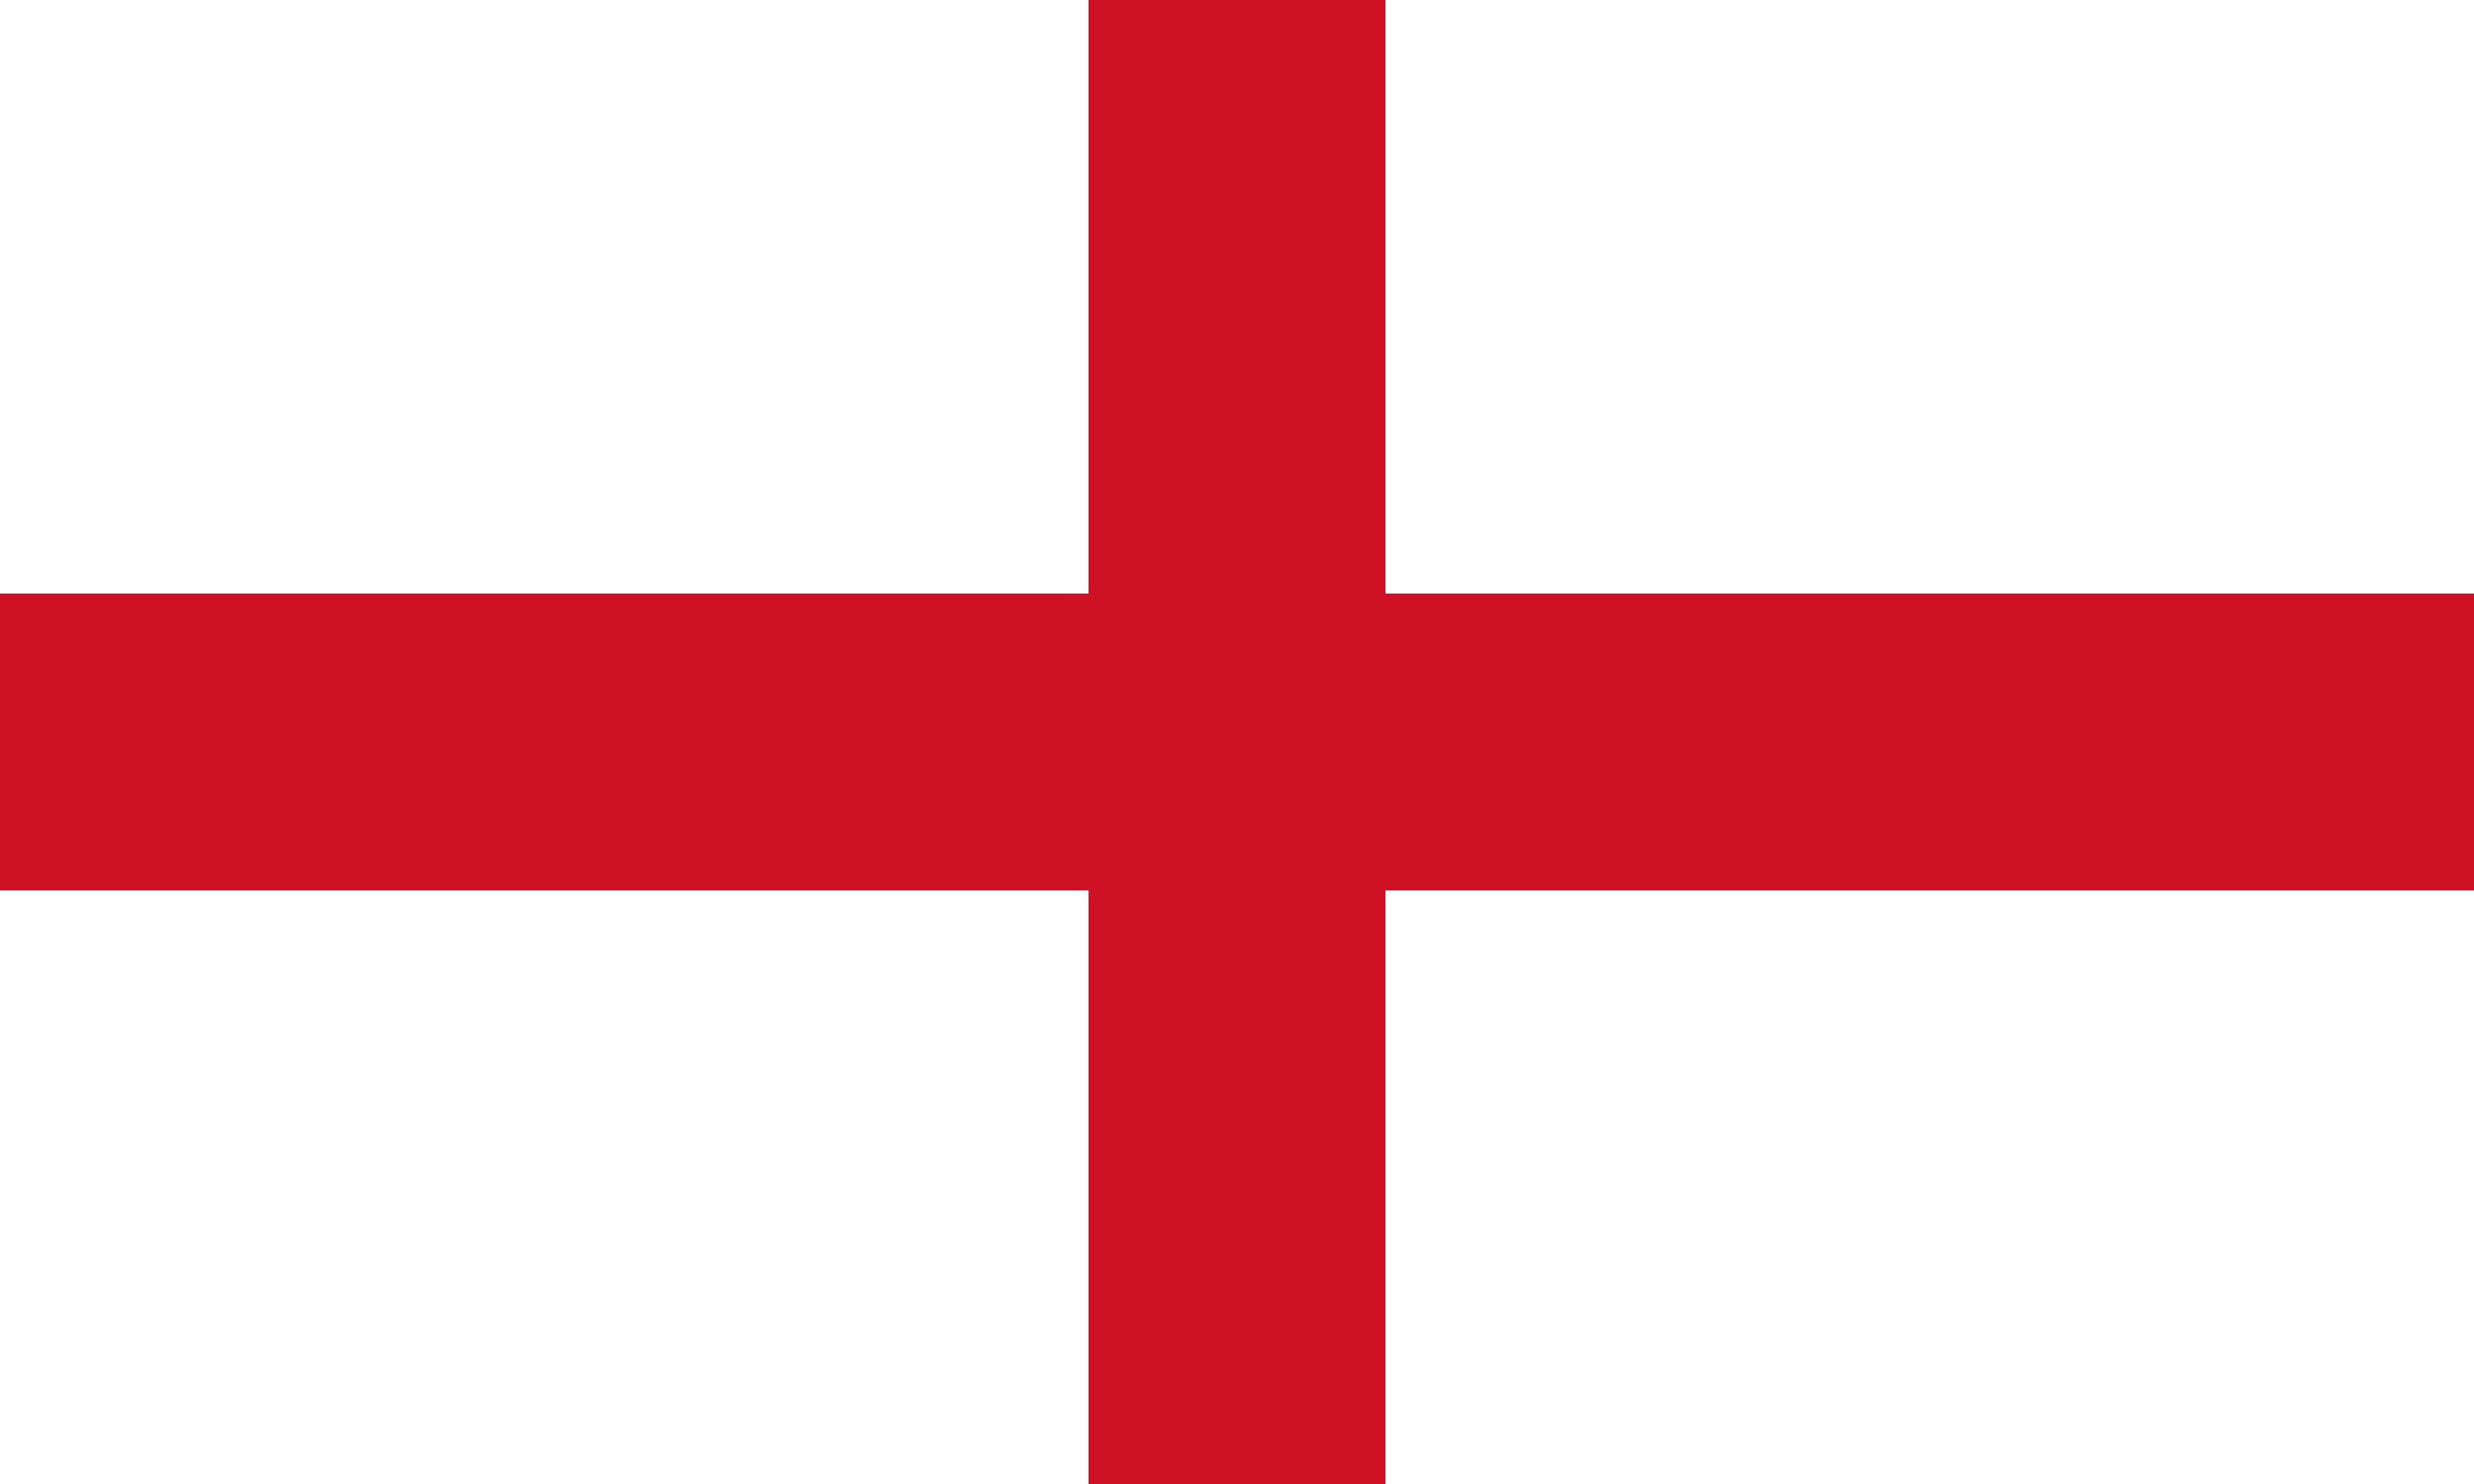 Details about   Zest England Flags with St George Cross 